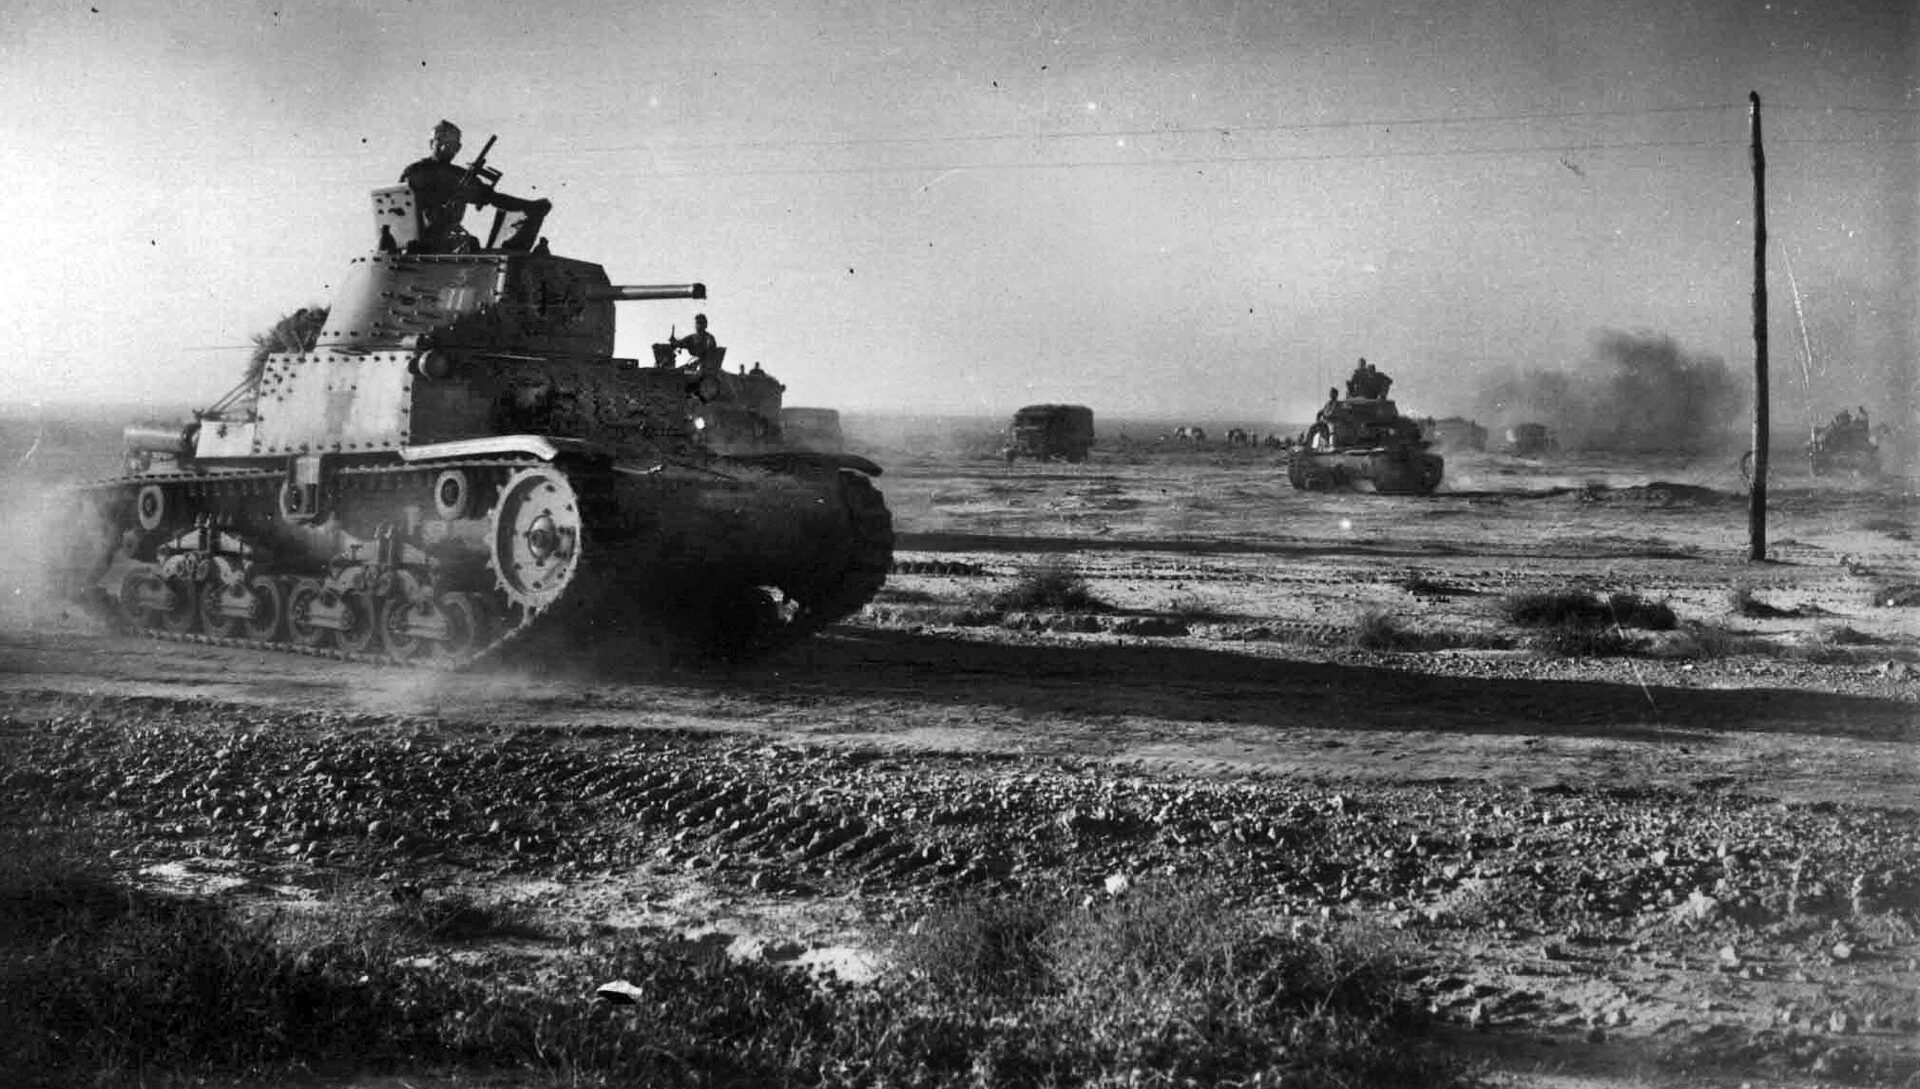 An Italian M13/40 tank of the Ariete Division is silhouetted against the horizon during the fighting of June 10, 1942.